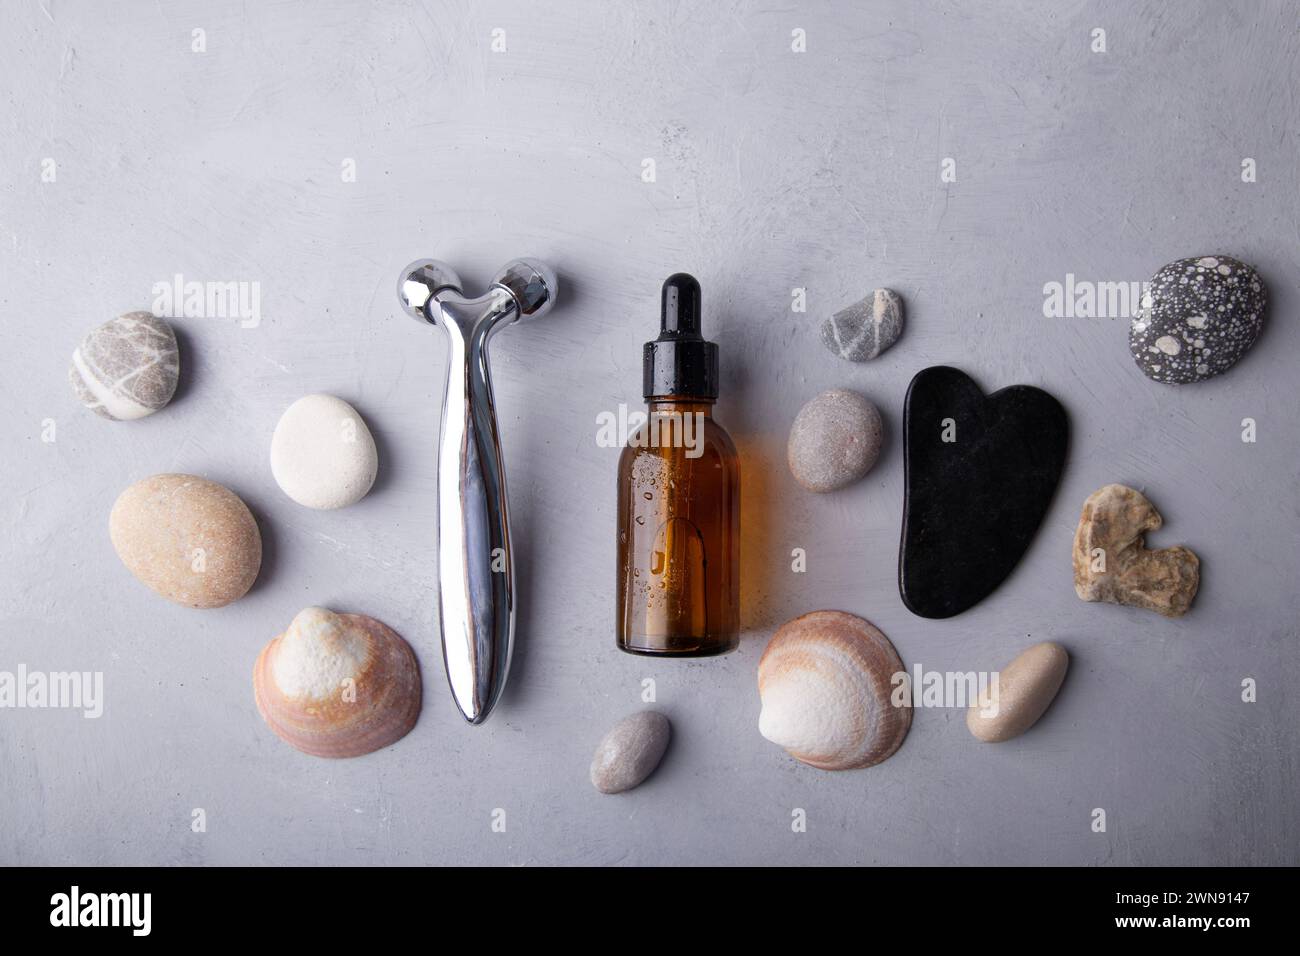 beauty essentials and facial massage tools among pebbles on a grey backdrop. Summer spa care concept. Stock Photo